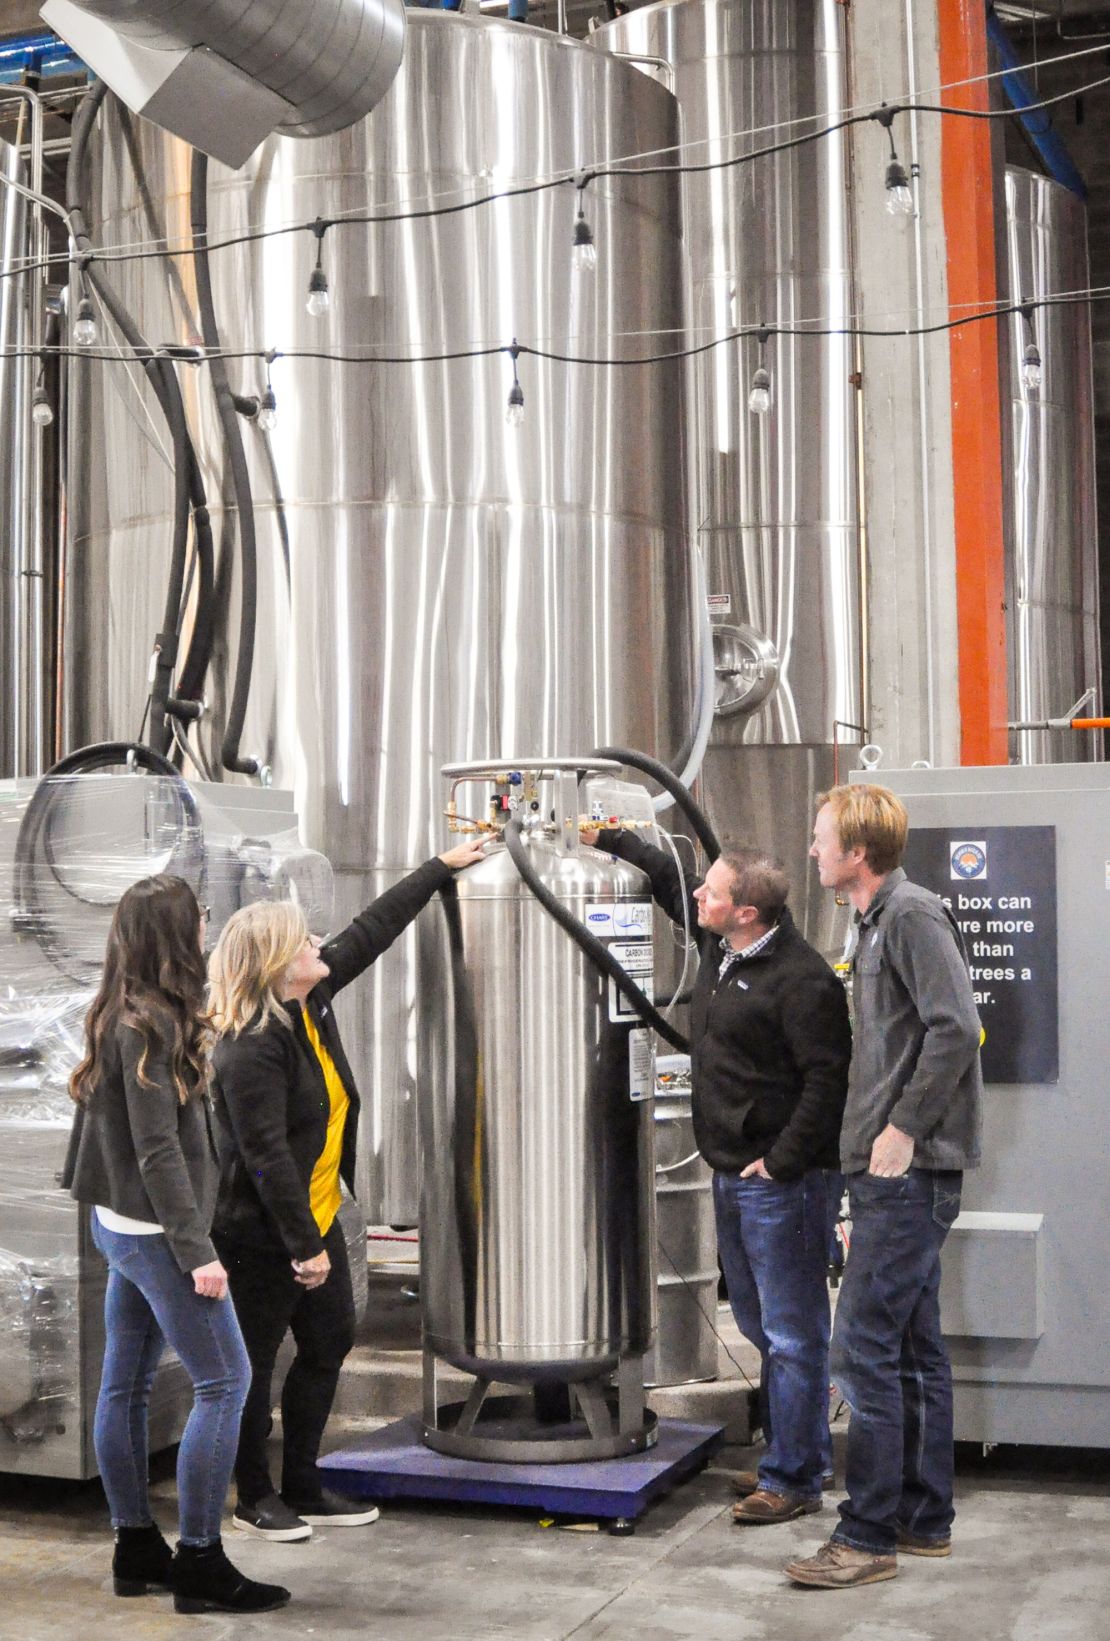 Kaitlin Urso (Colorado Department of Public Health and Environment), Amy George (Earthly Labs), Brian Cusworth (The Clinic) and Charlie Berger (Denver Beer) checking the valves for Denver Beer's CO2 tank and Earthly Labs' CO2 recovery equipment that will later be used in The Clinic's cannabis plants.